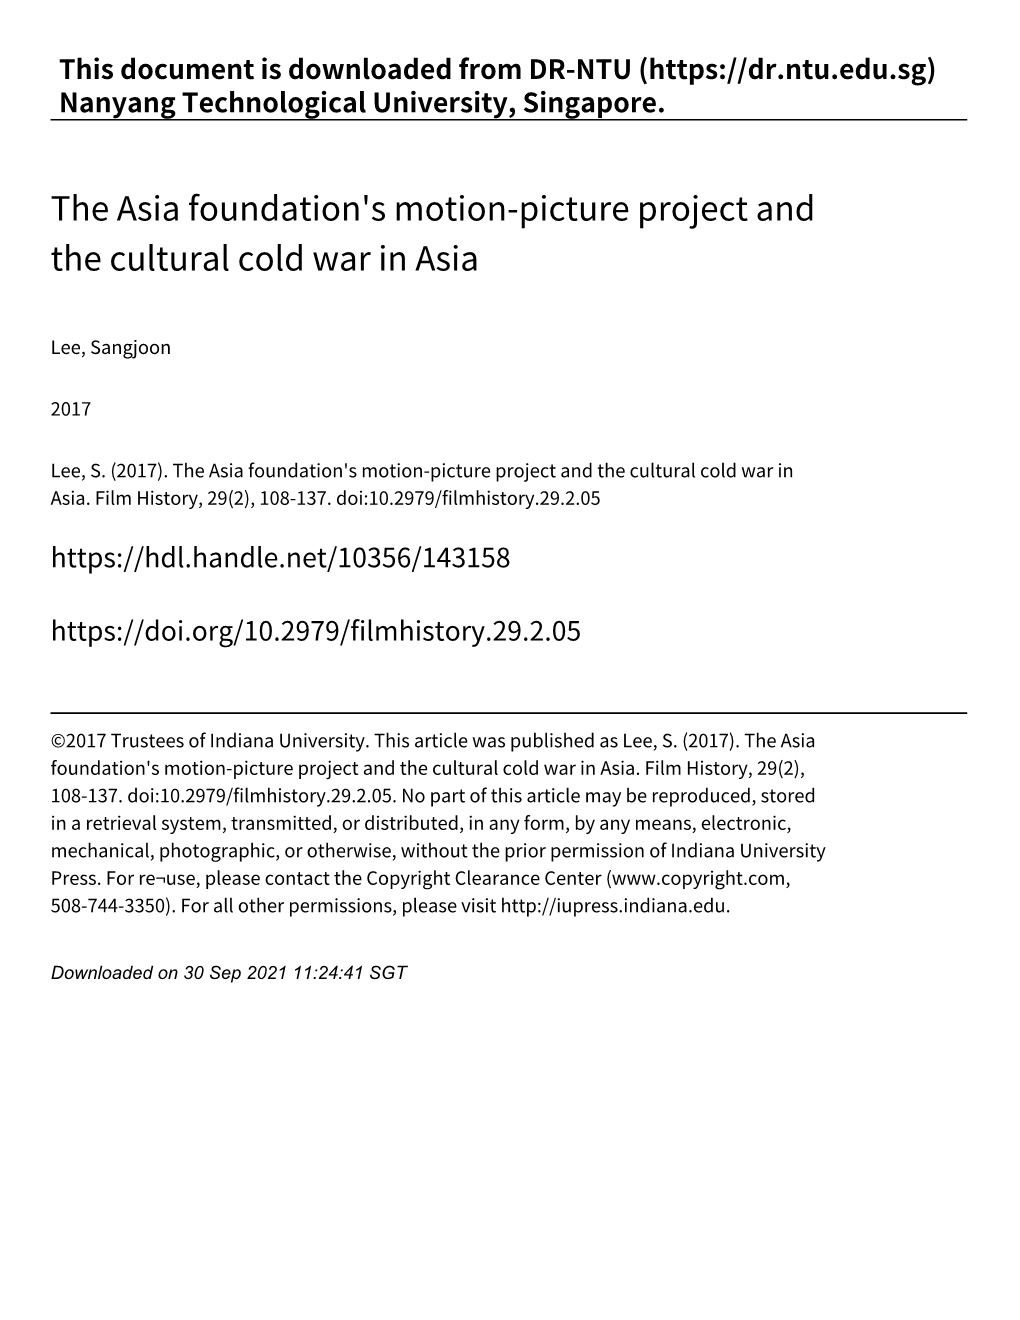 The Asia Foundation's Motion‑Picture Project and the Cultural Cold War in Asia